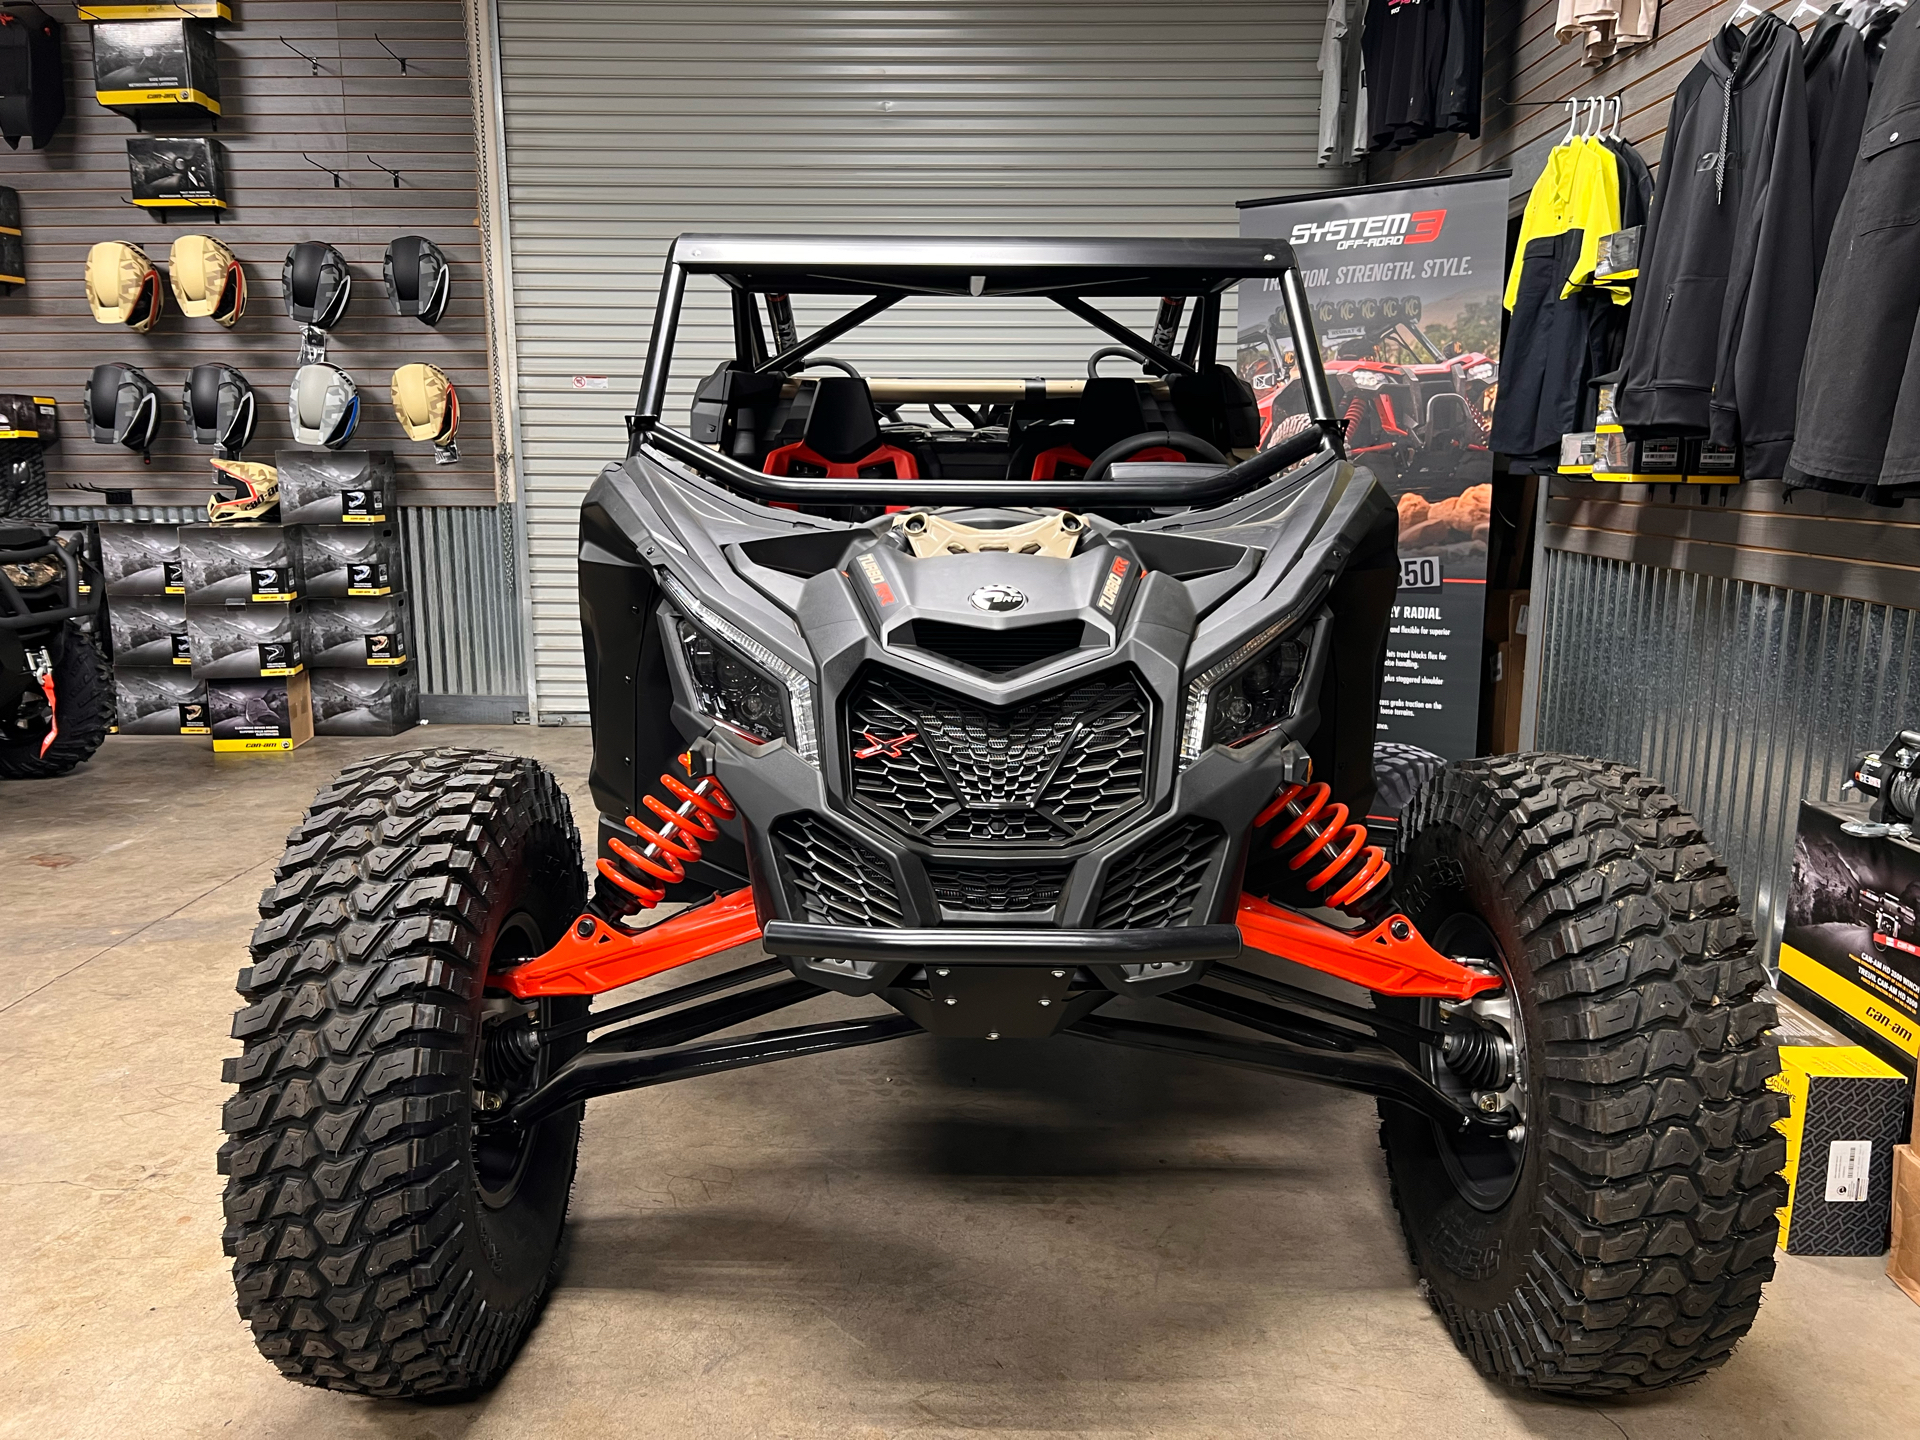 2022 Can-Am Maverick X3 X RS Turbo RR with Smart-Shox in Acampo, California - Photo 3